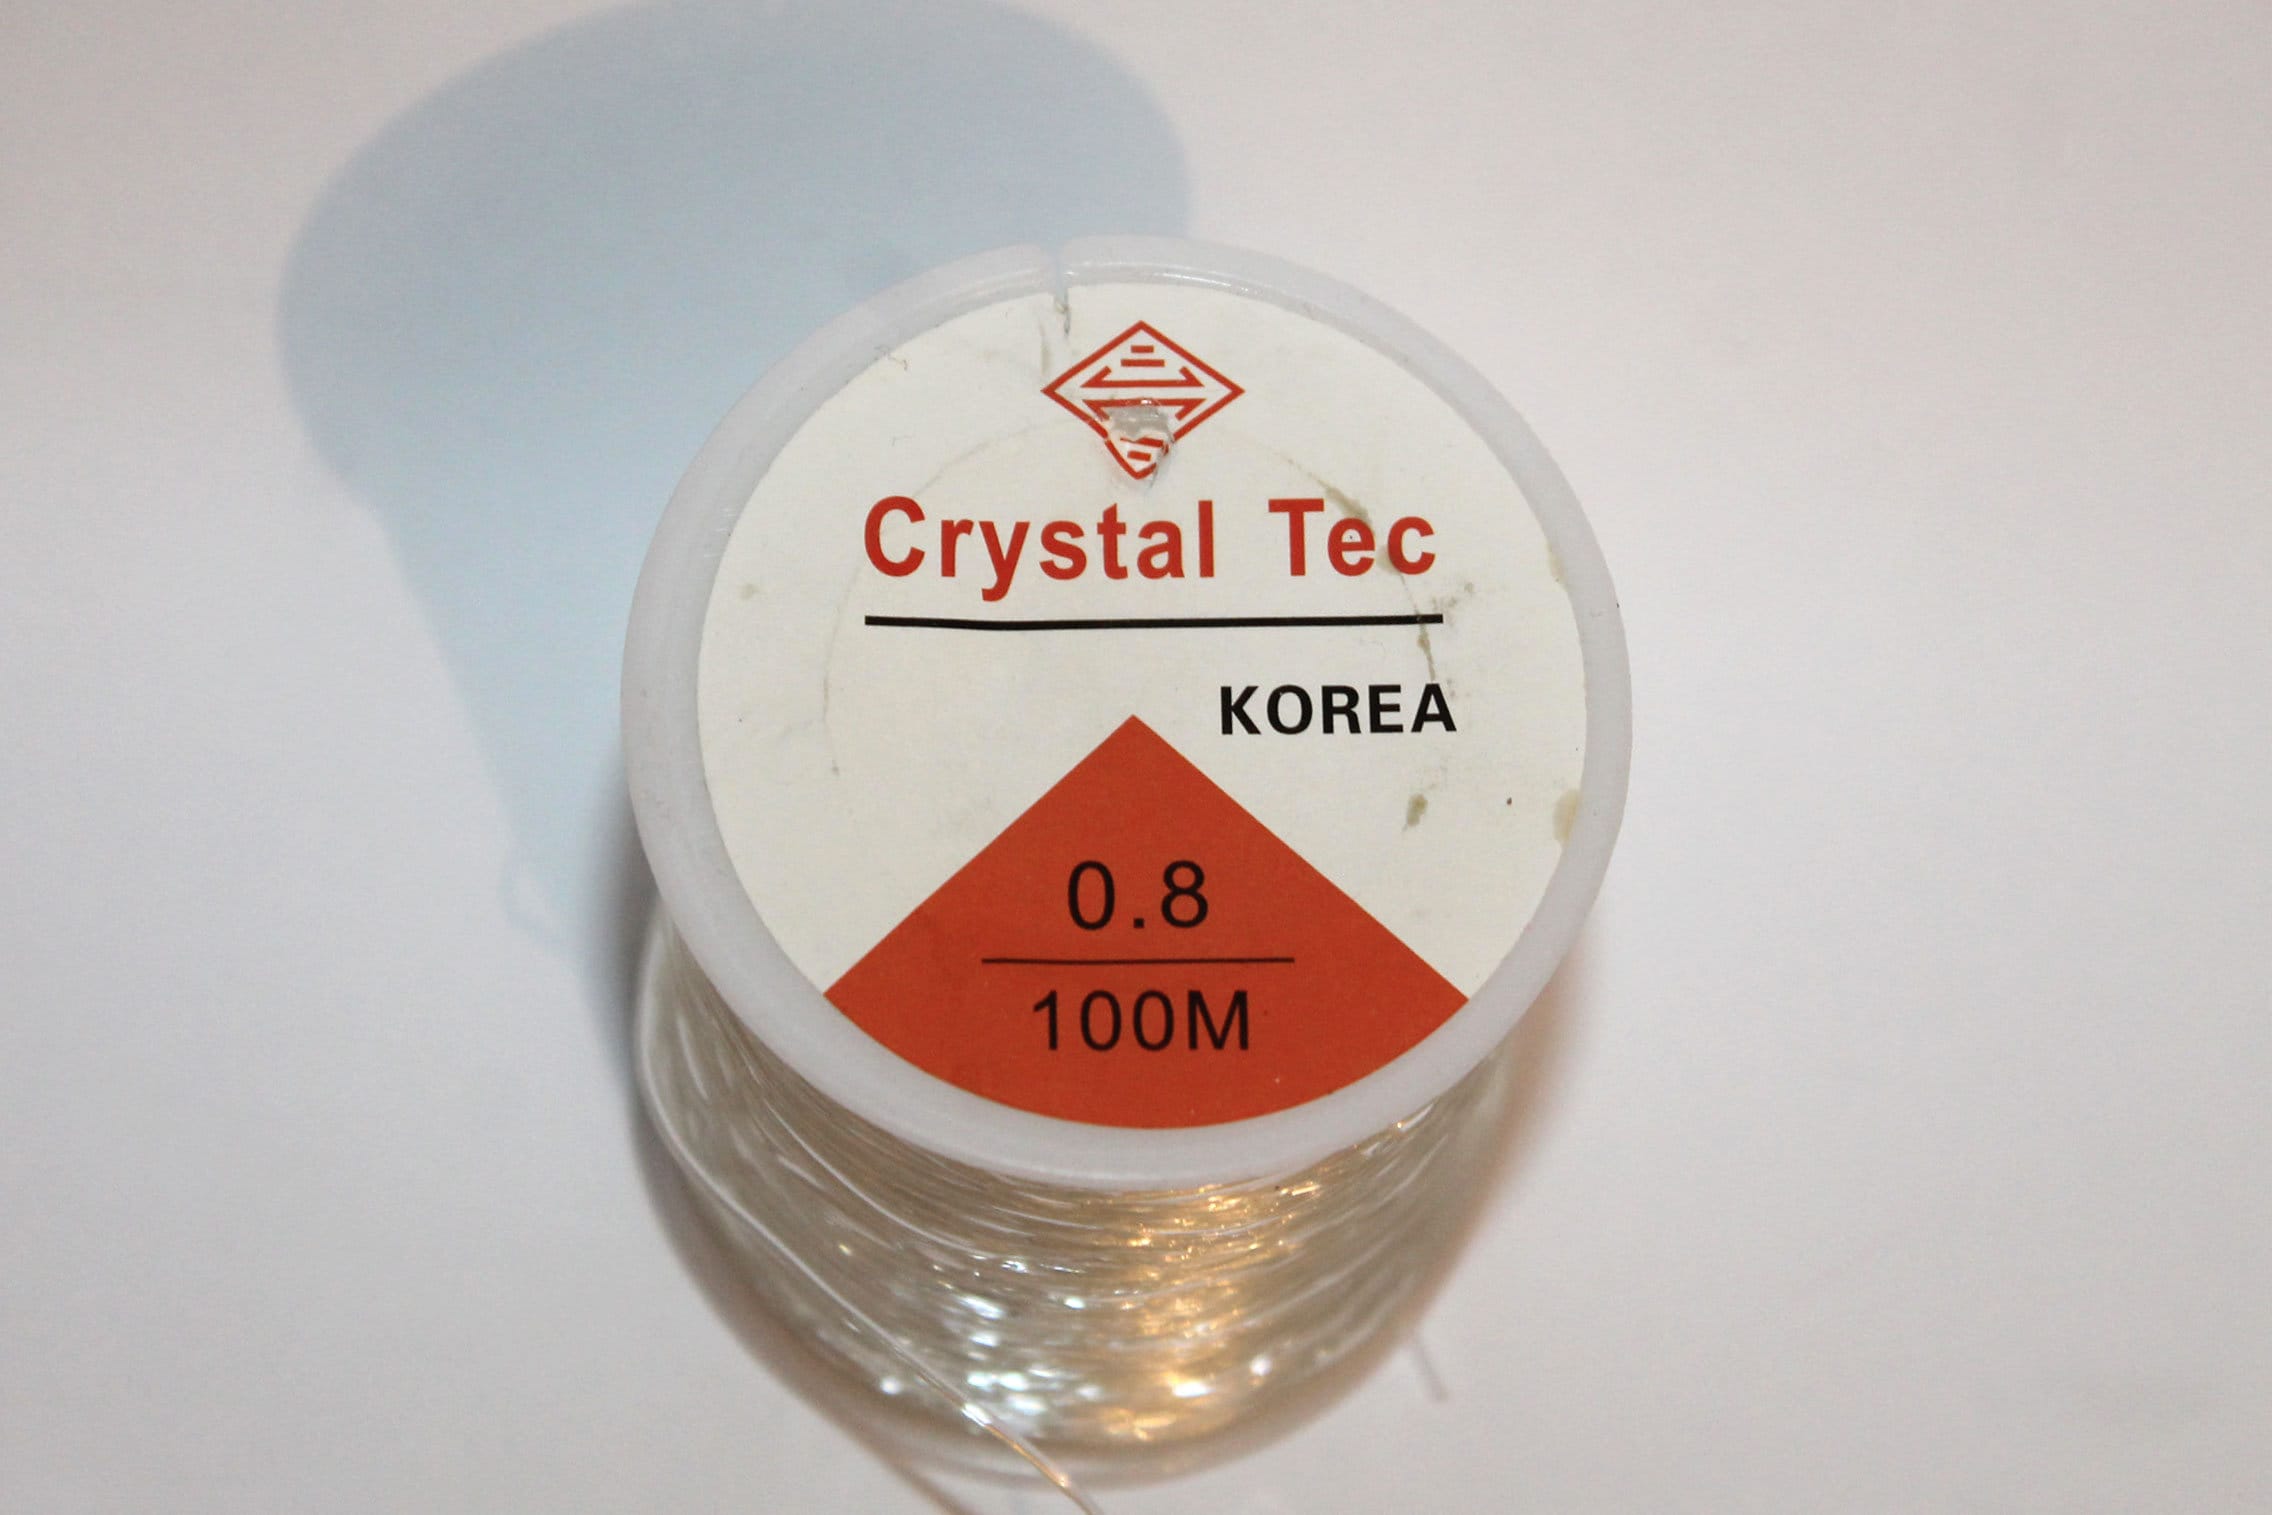 crystal tec, crystal tec Suppliers and Manufacturers at